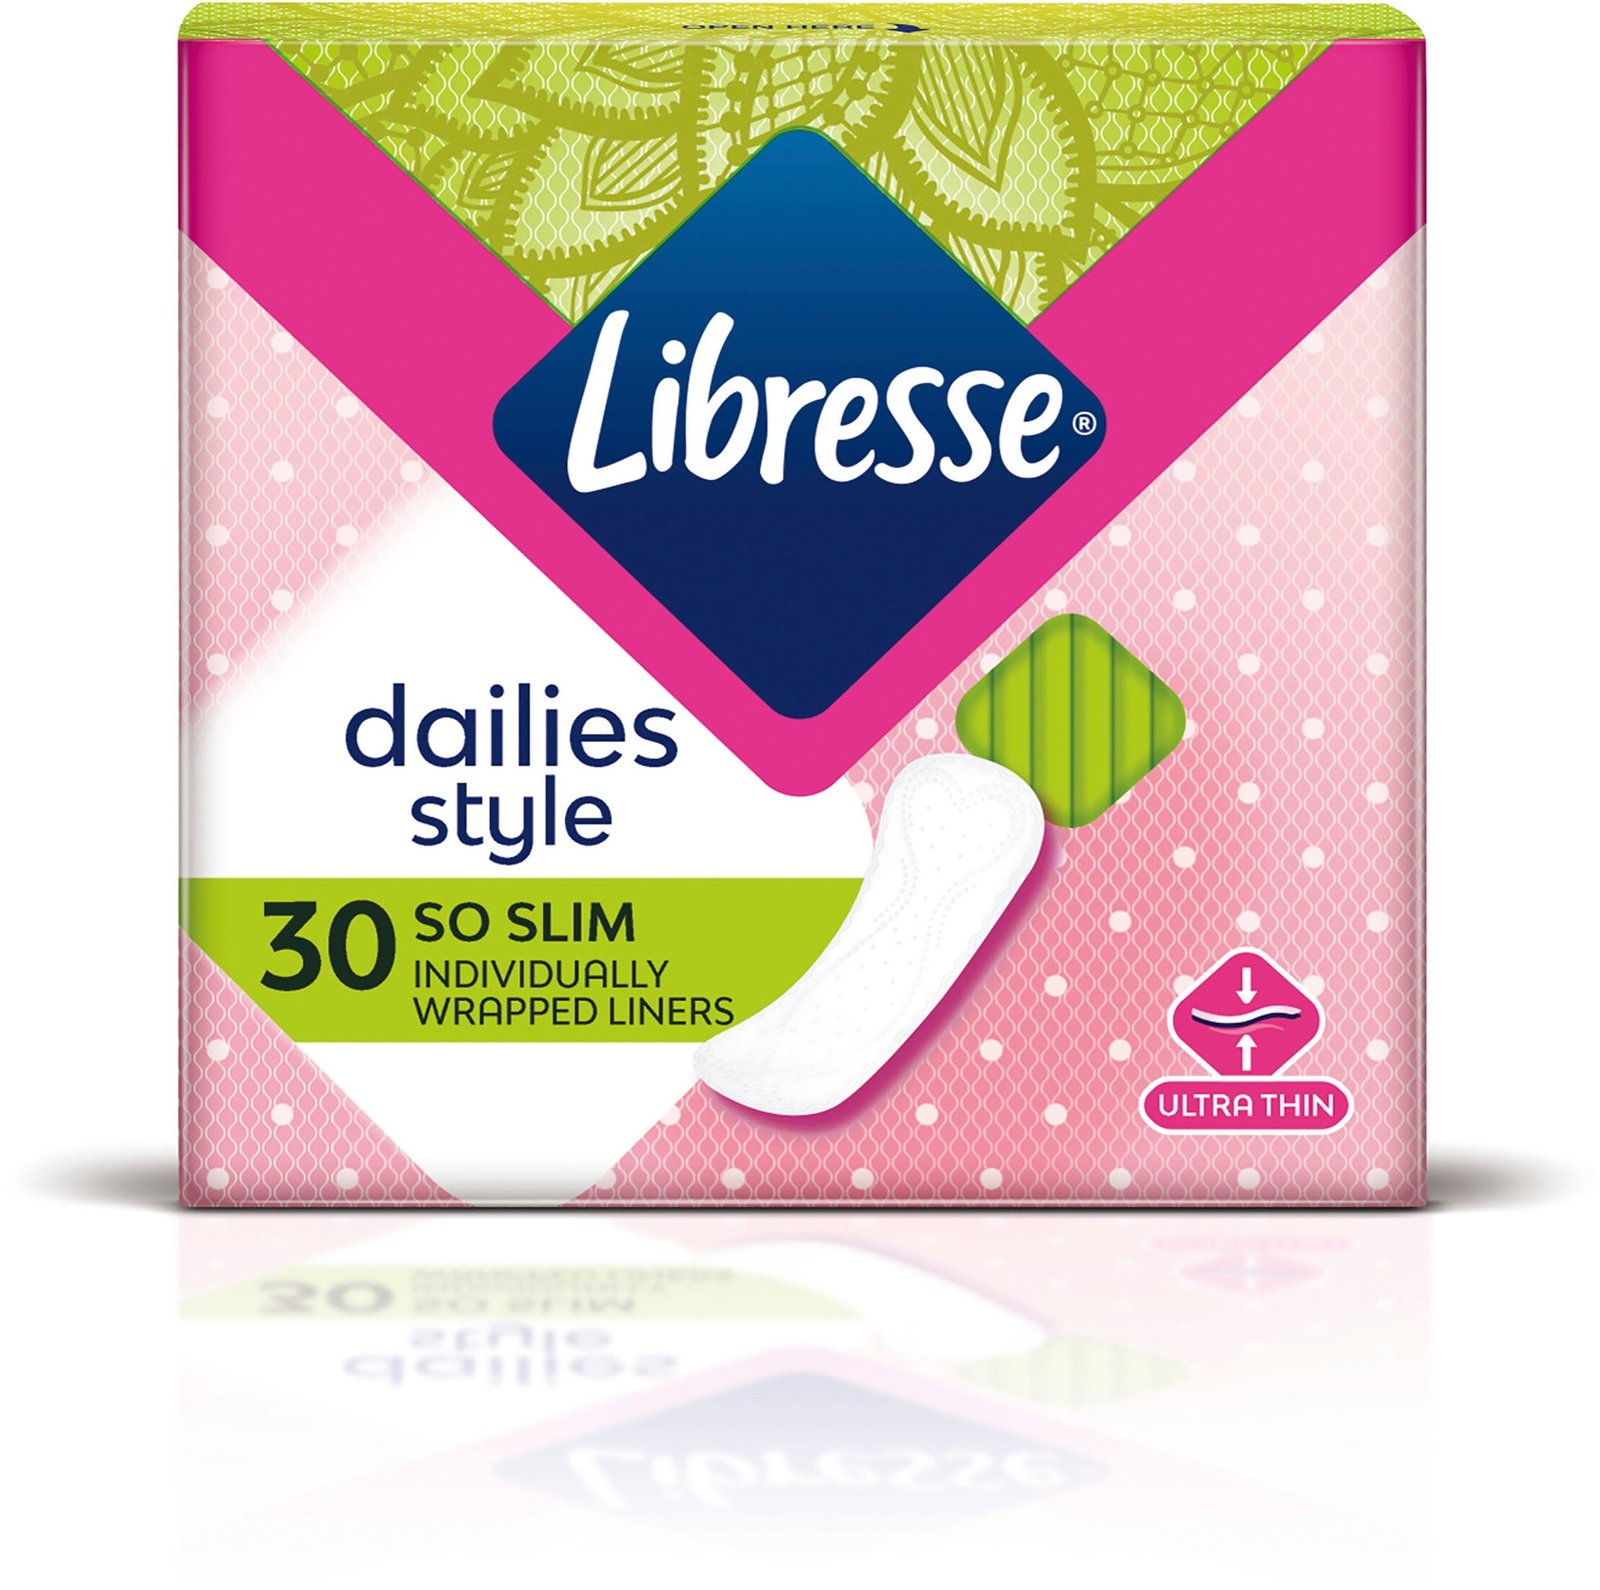 Libresse Dailies Style So Slim Trosskydd 30 st